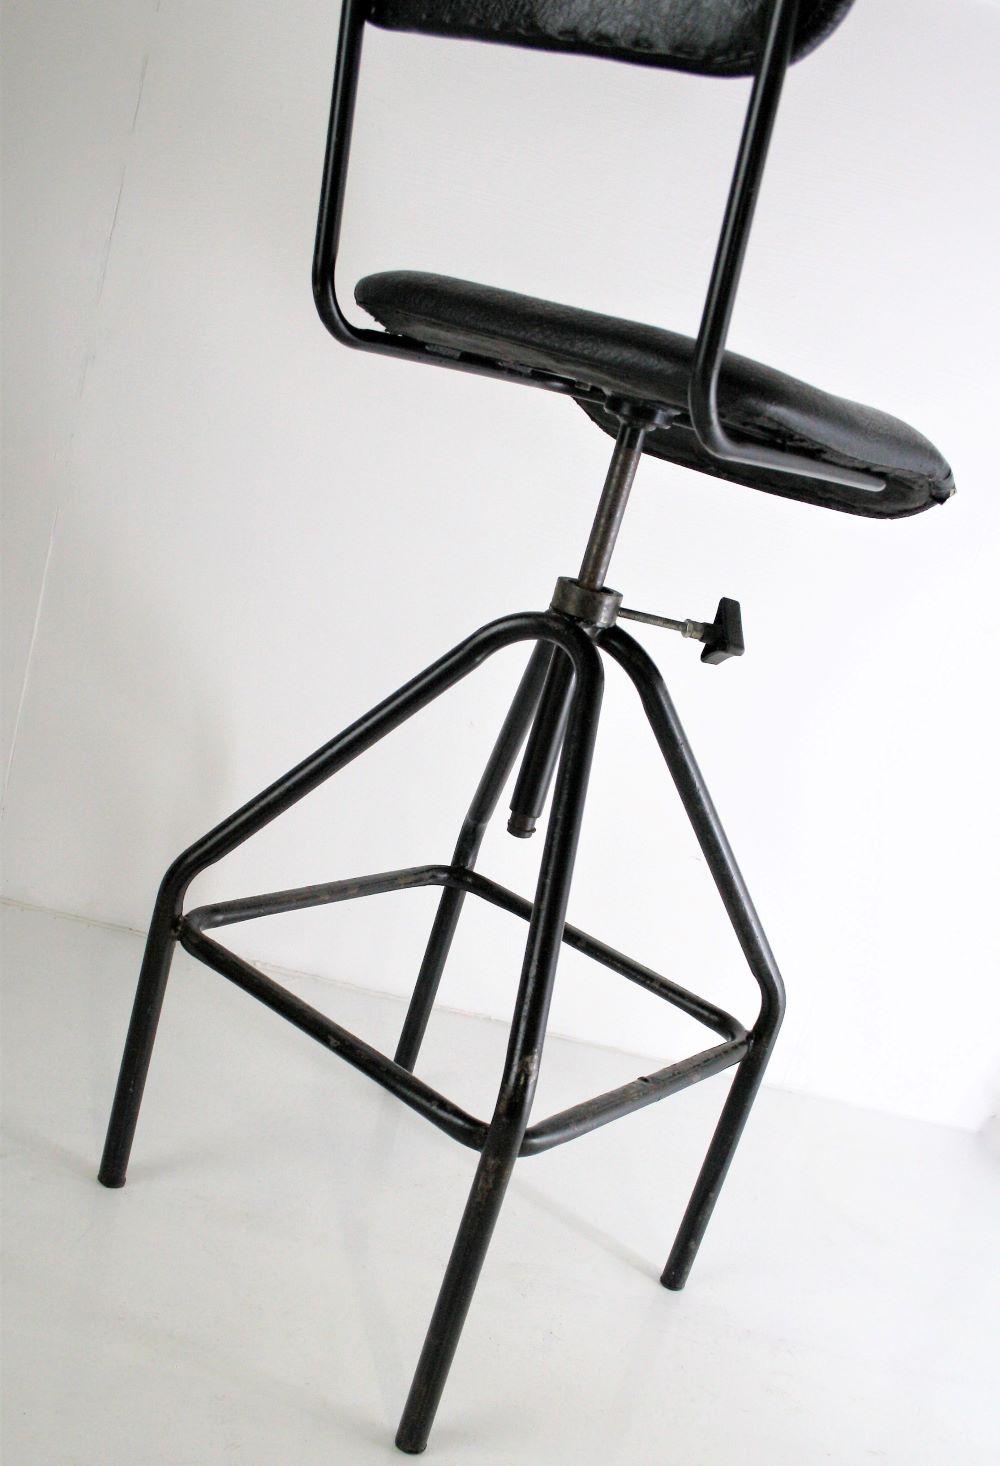 1970s Industrial Factory Swivel Stool with Backrest Sturdy Black metal frame 4